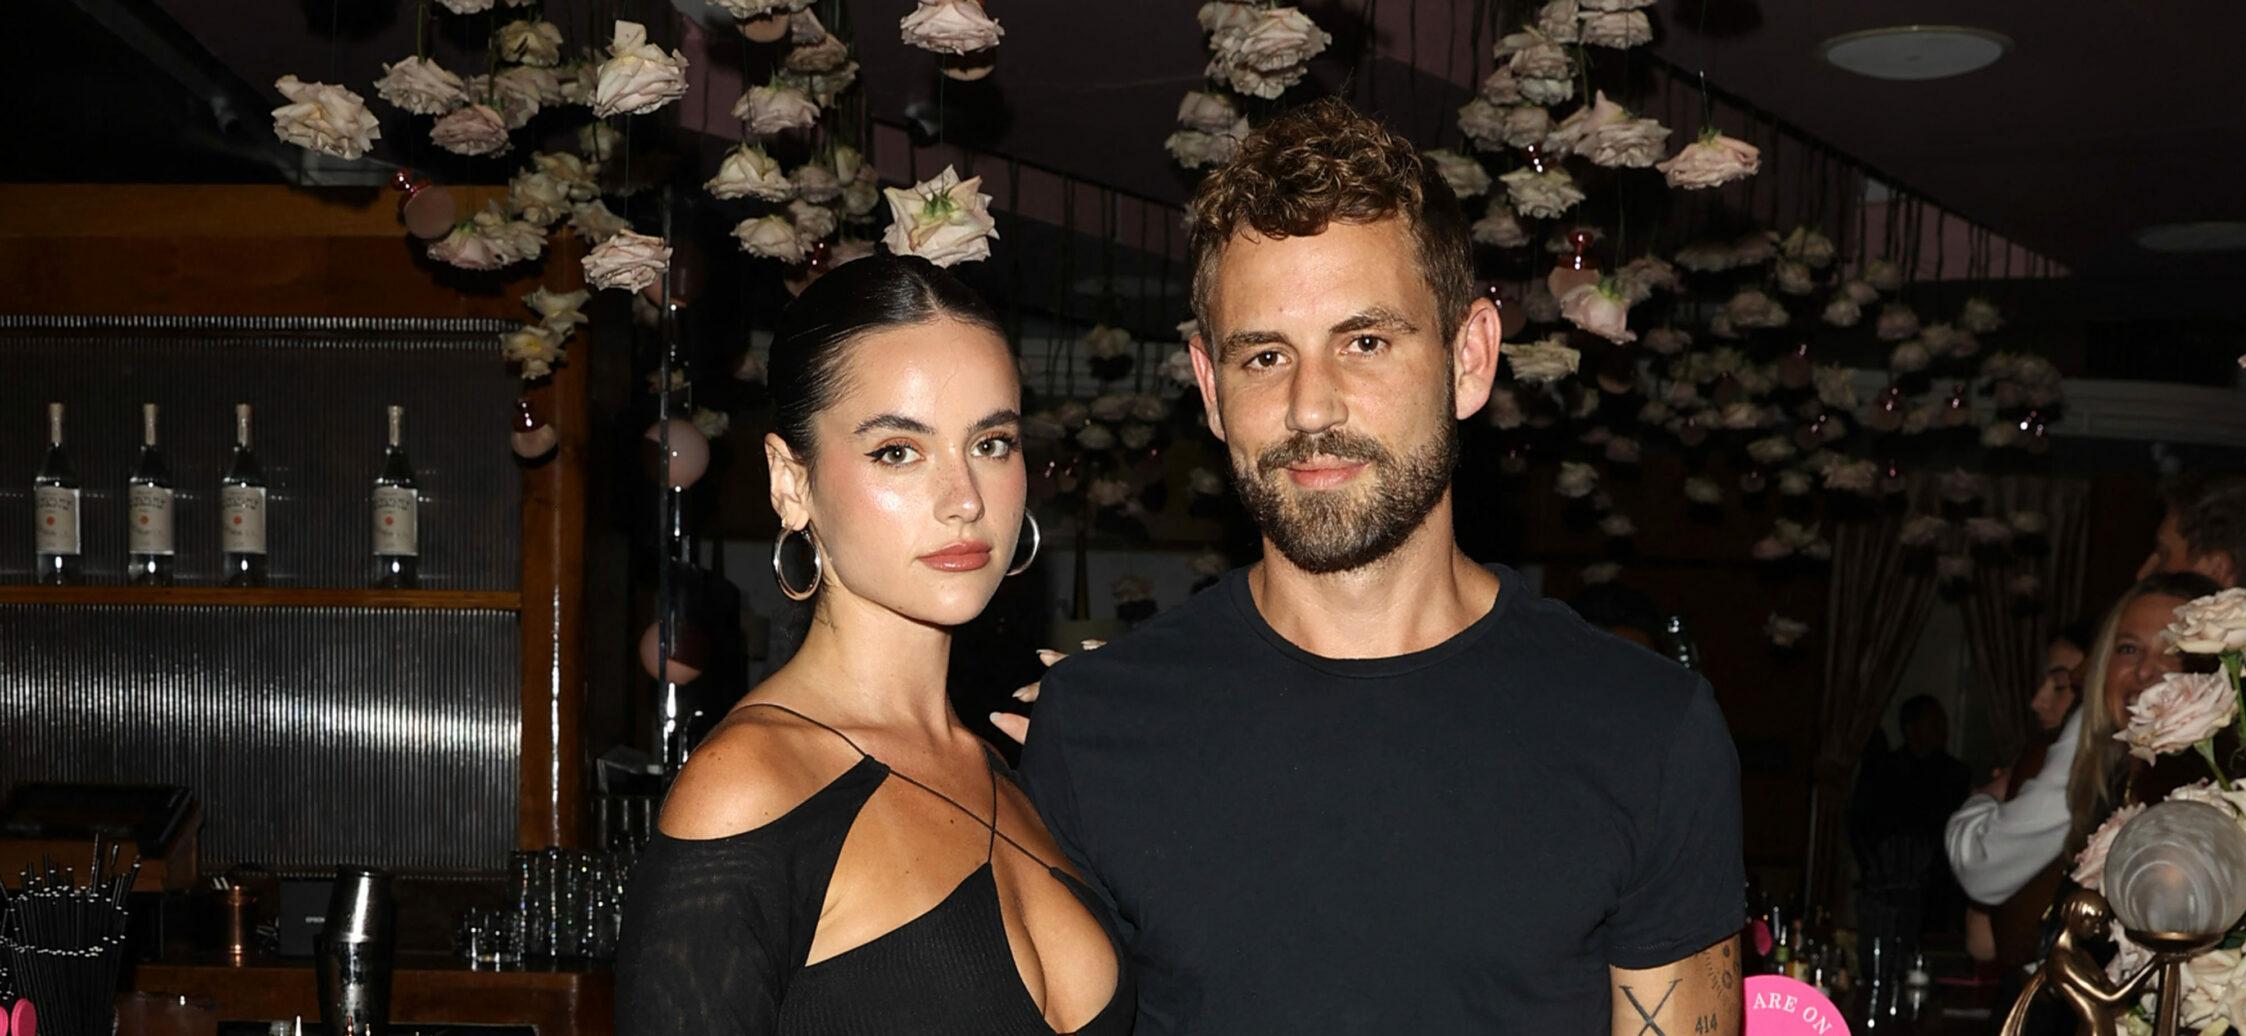 Fans SLAM ‘The Bachelor’s Nick Viall For NSFW IG Pic: ‘Is Anything Sacred Anymore?’